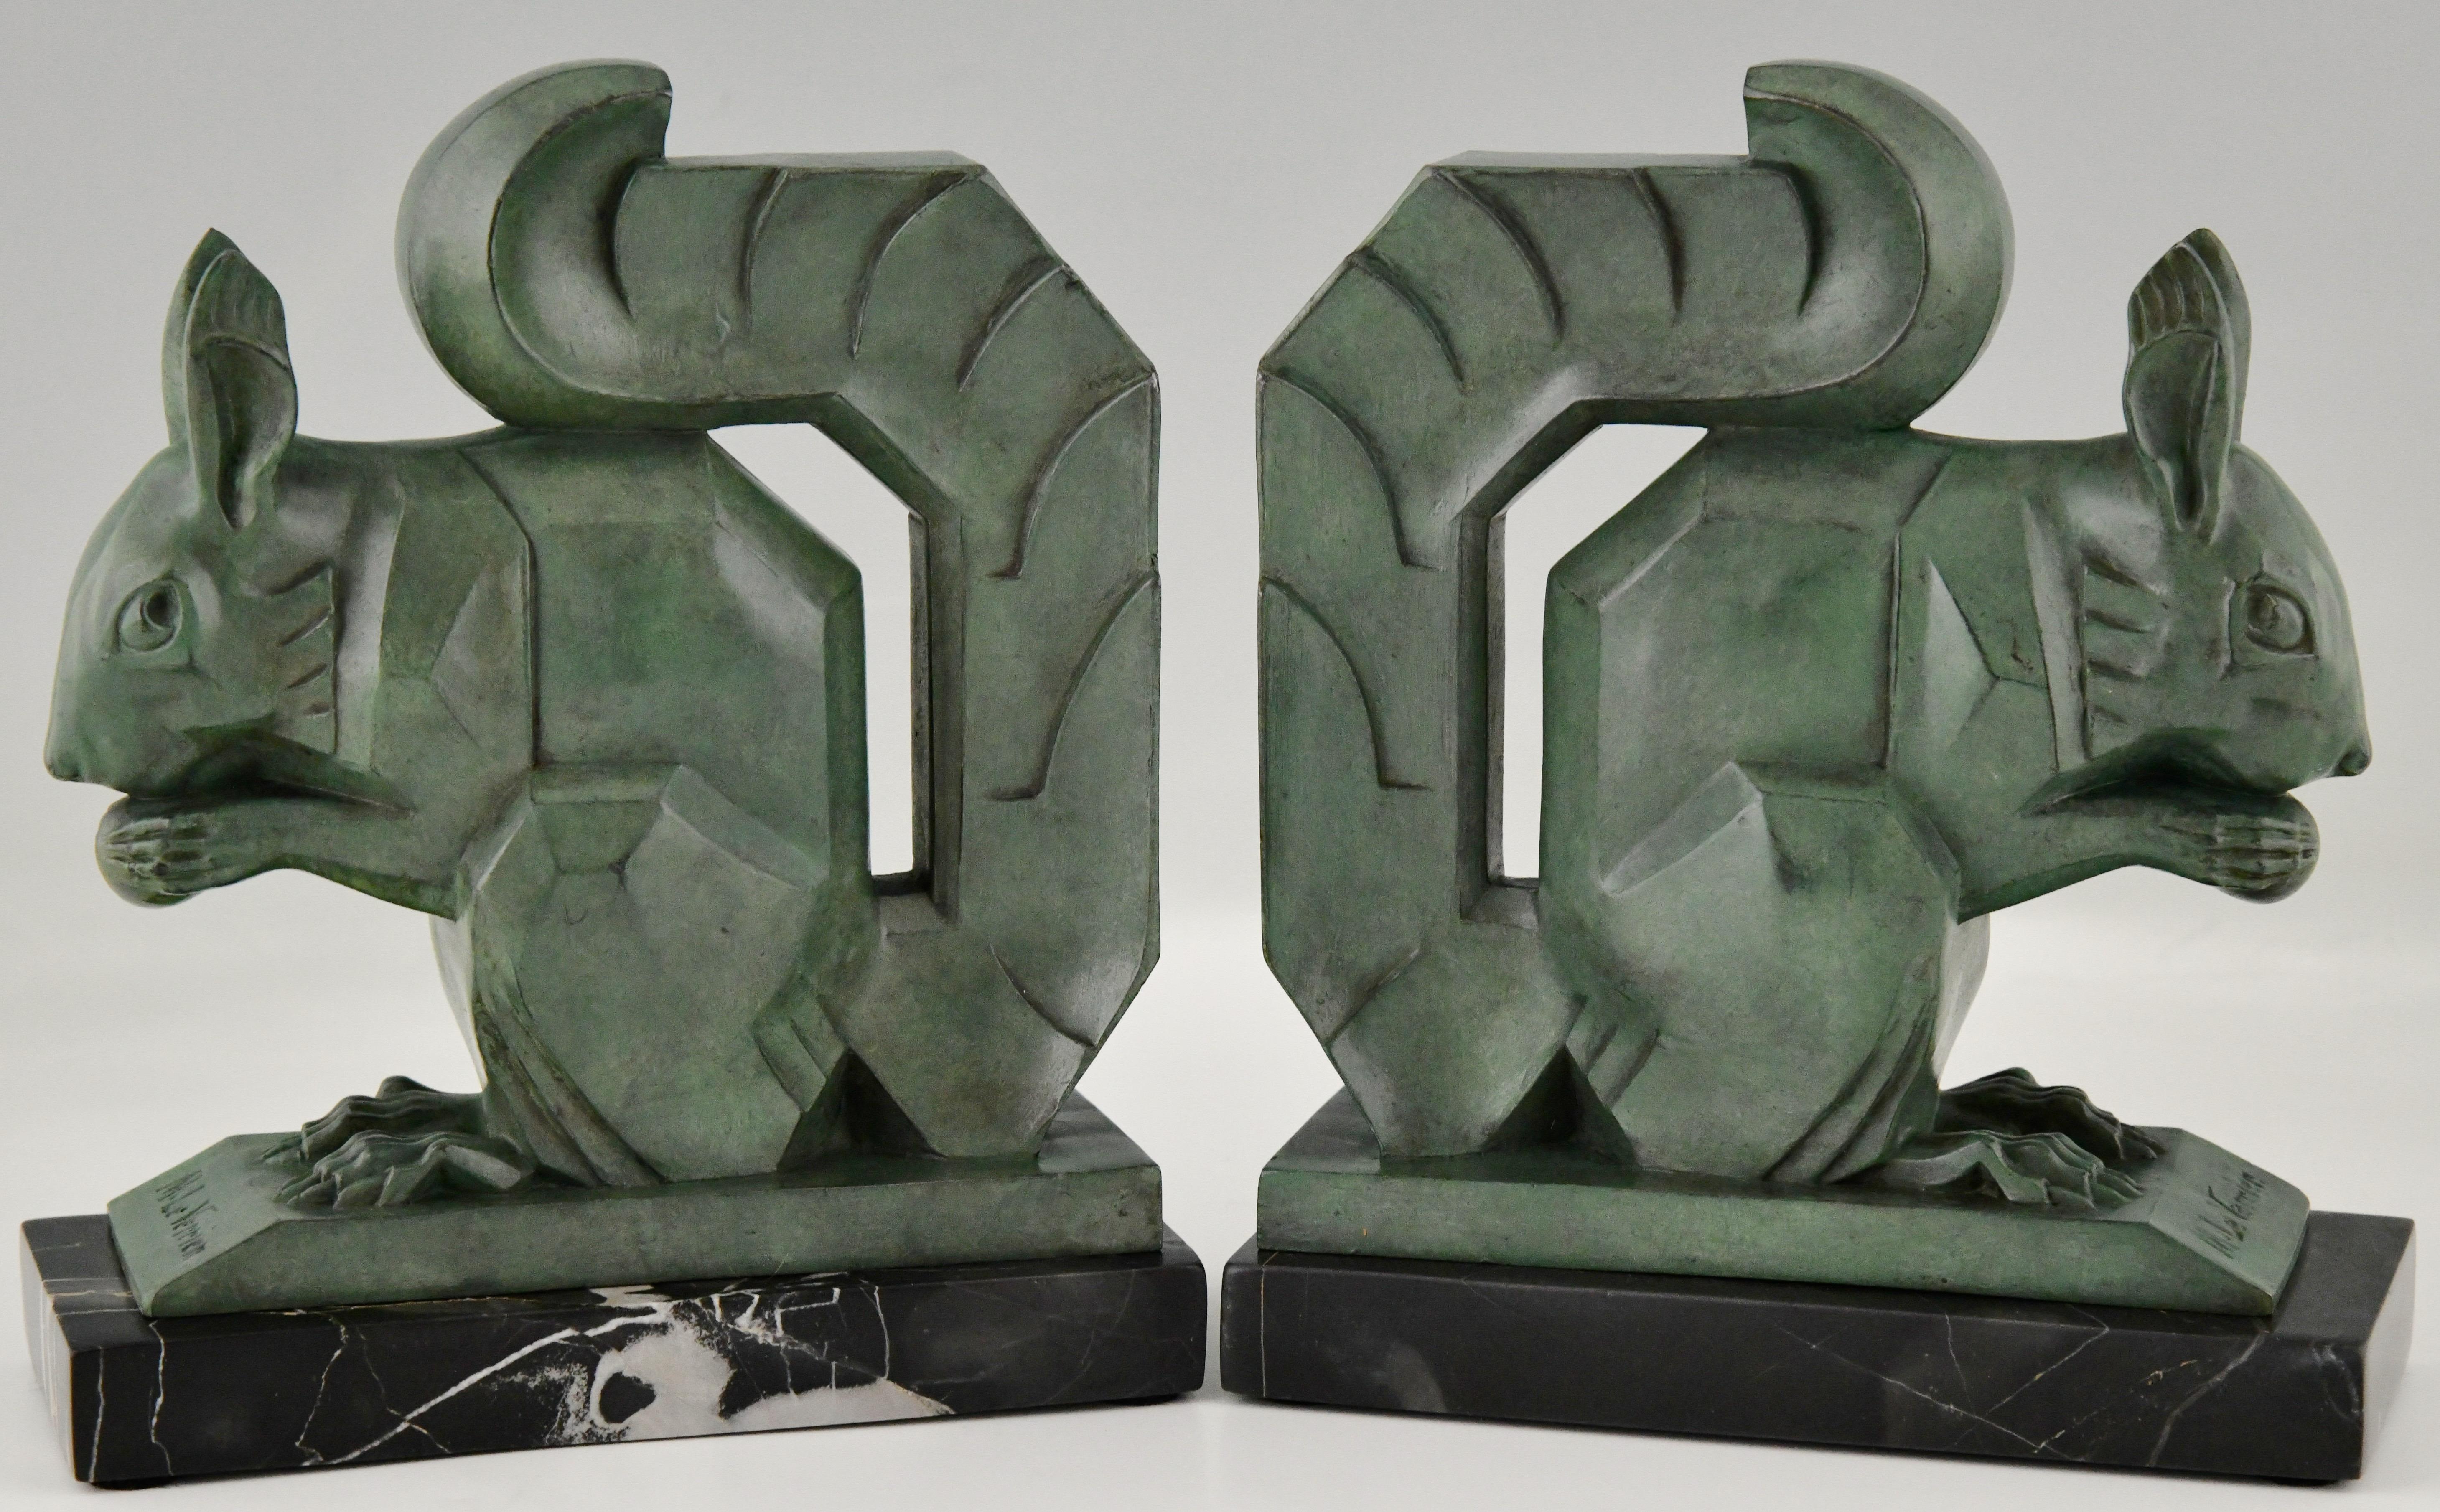 Art Deco squirrel bookends by Max Le Verrier.
The sculptures are in Art metal with green patina and stand on Portor marble bases.
France 1930.
This size is very hard to find.